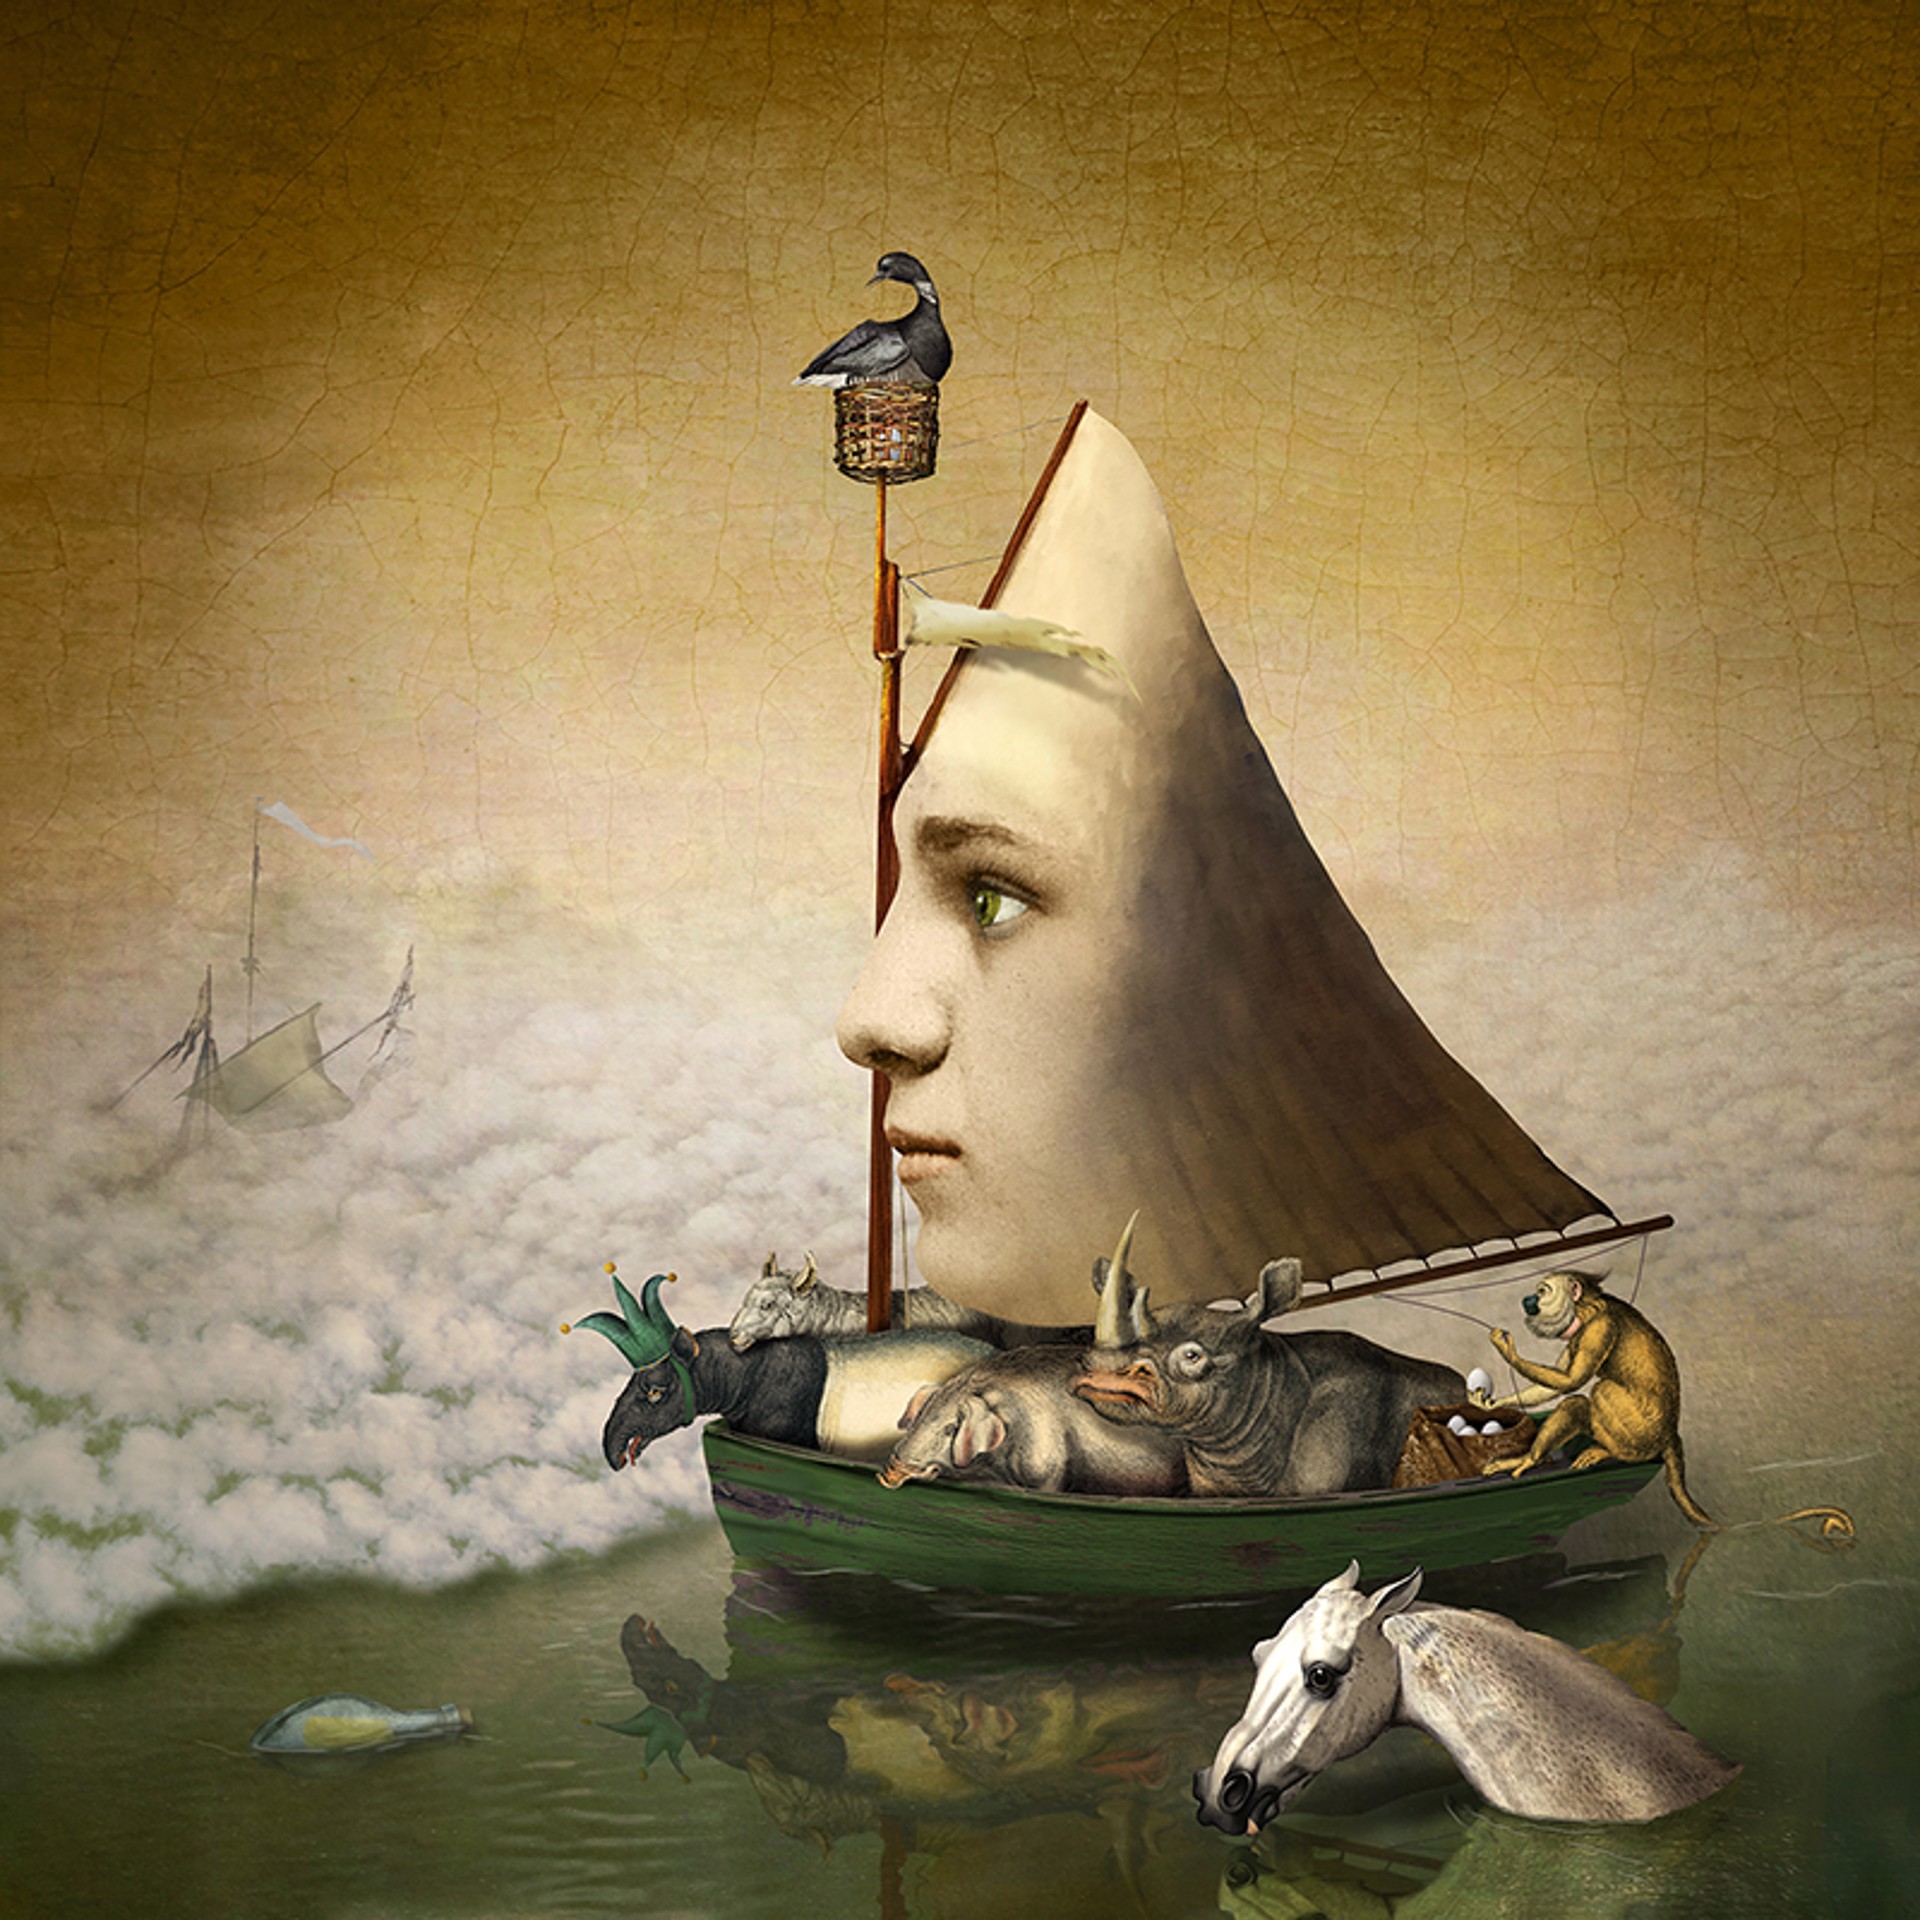 Ship of fools (15 x 15) by Maggie Taylor